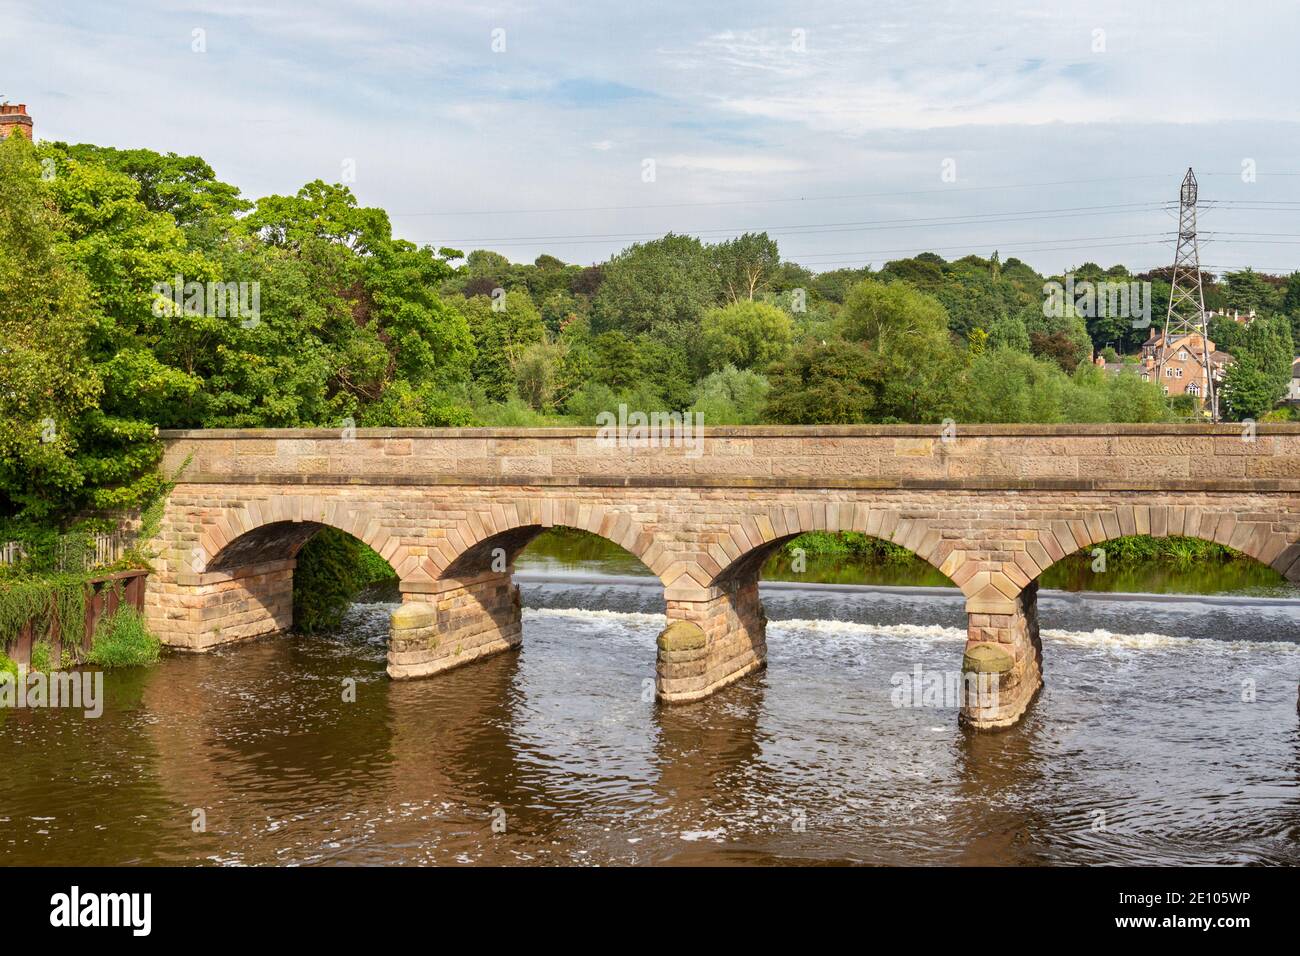 Side branch of the Trent Bridge (c.1864) and the River Trent, Burton upon Trent, (Burton-on-Trent or Burton), a market town in Staffordshire, UK. Stock Photo